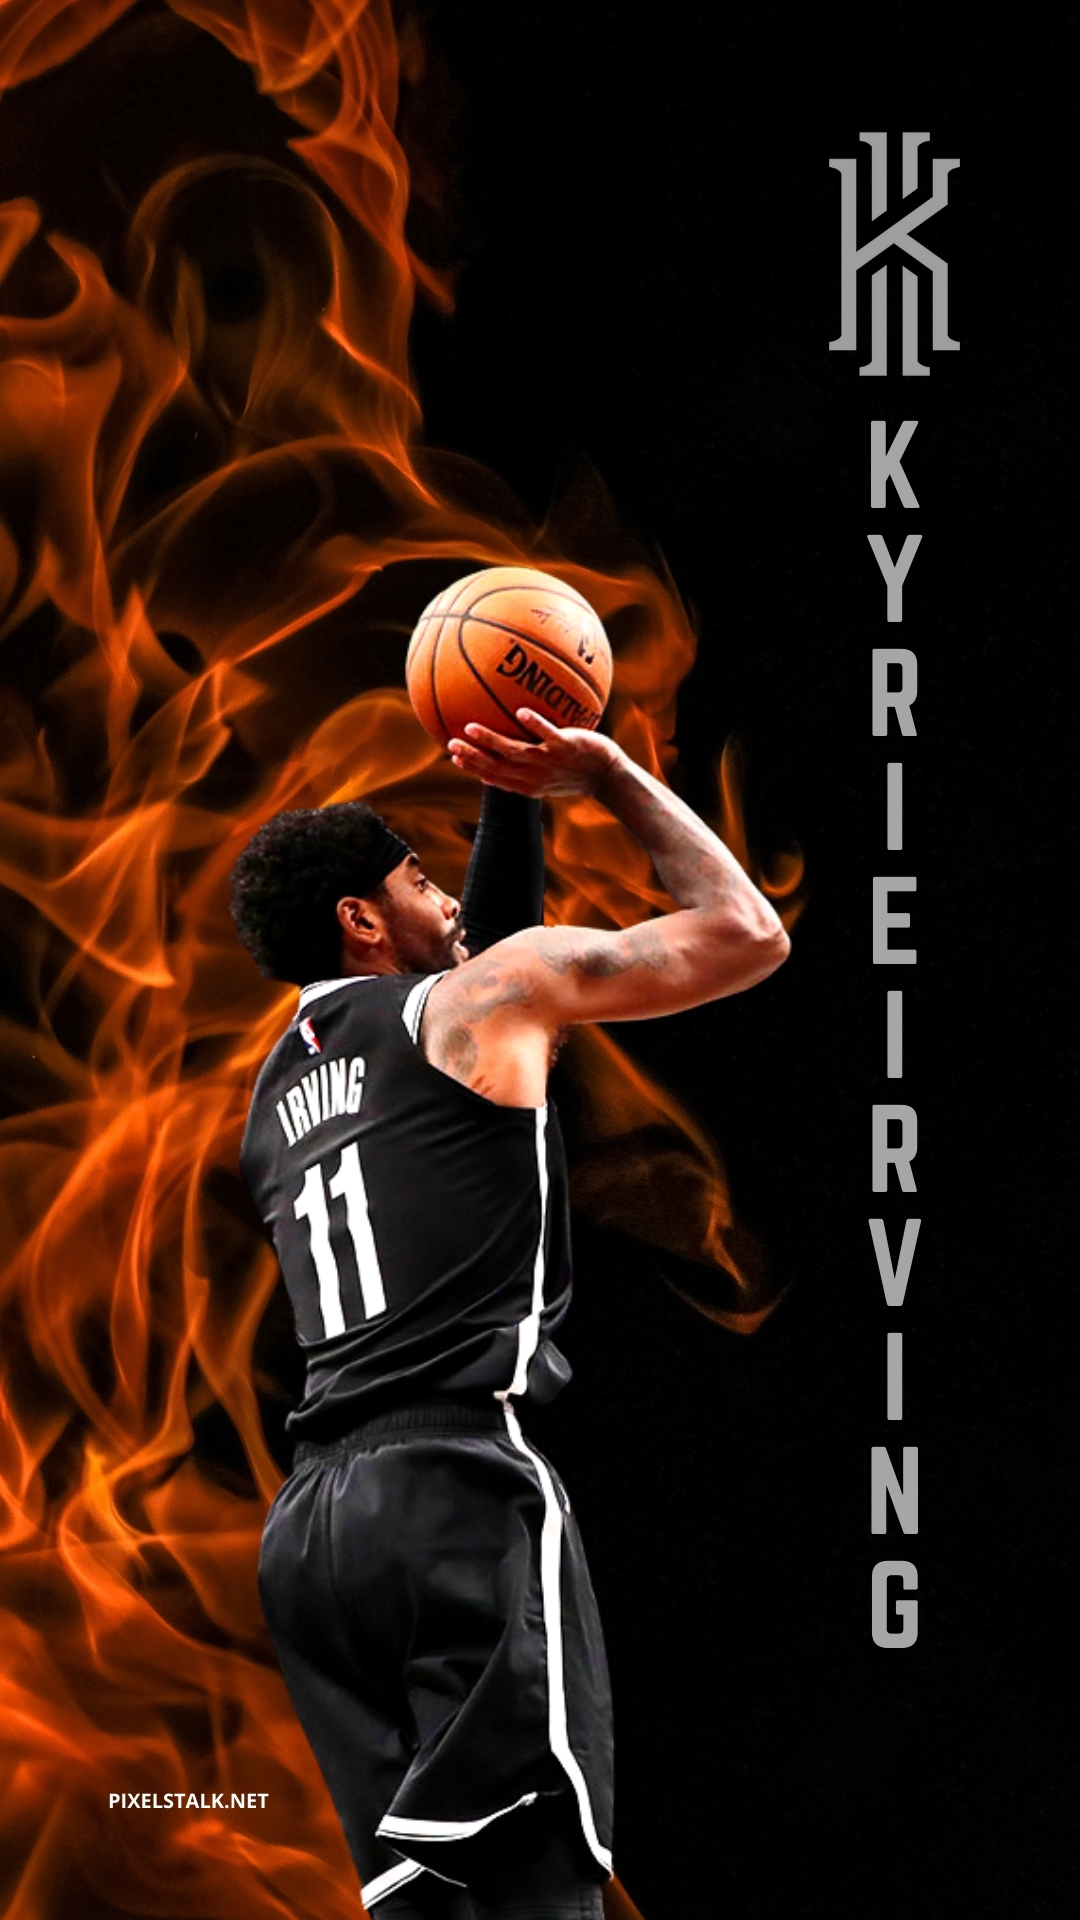 Download wallpapers 4k Kyrie Irving grunge art NBA Brooklyn Nets  basketball stars Kyrie Andrew Irving basketball black abstract rays Kyrie  Irving Brooklyn Nets 2020 Kyrie Irving 4K for desktop free Pictures for